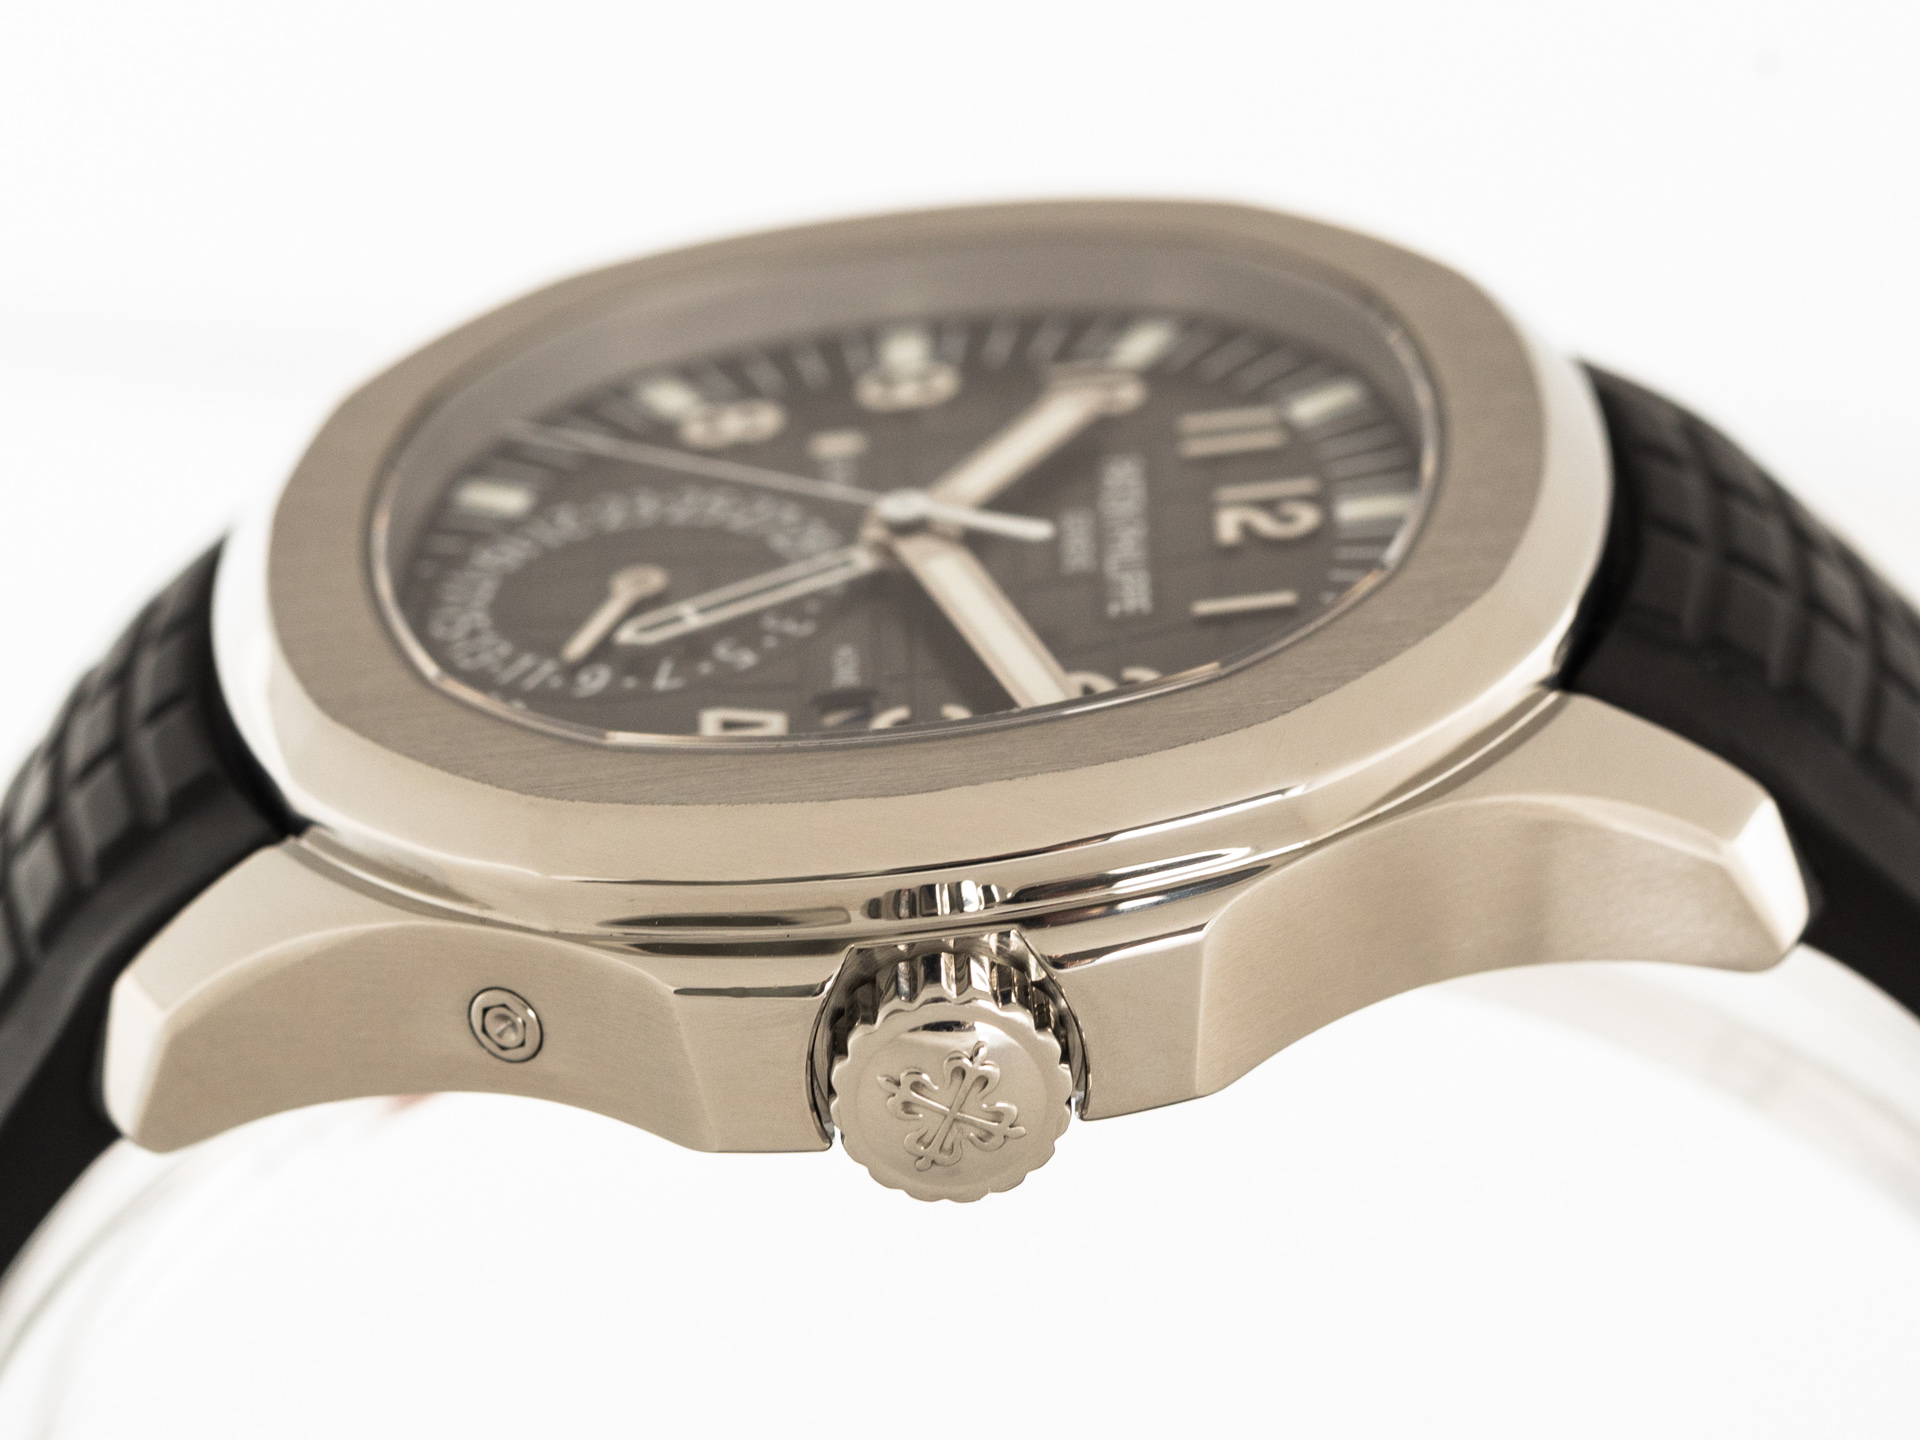 PATEK PHILIPPE AQUANAUT TRAVEL TIME Ref-5164A-001 Stainless Steel ...